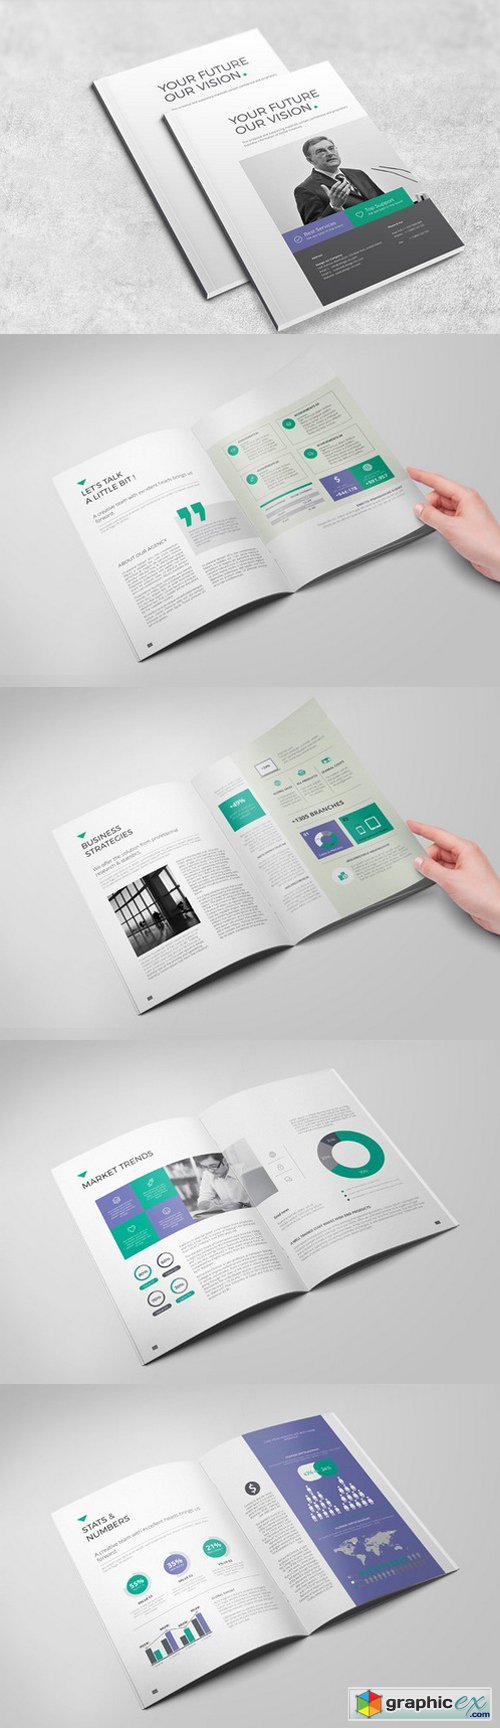 The Business Brochure